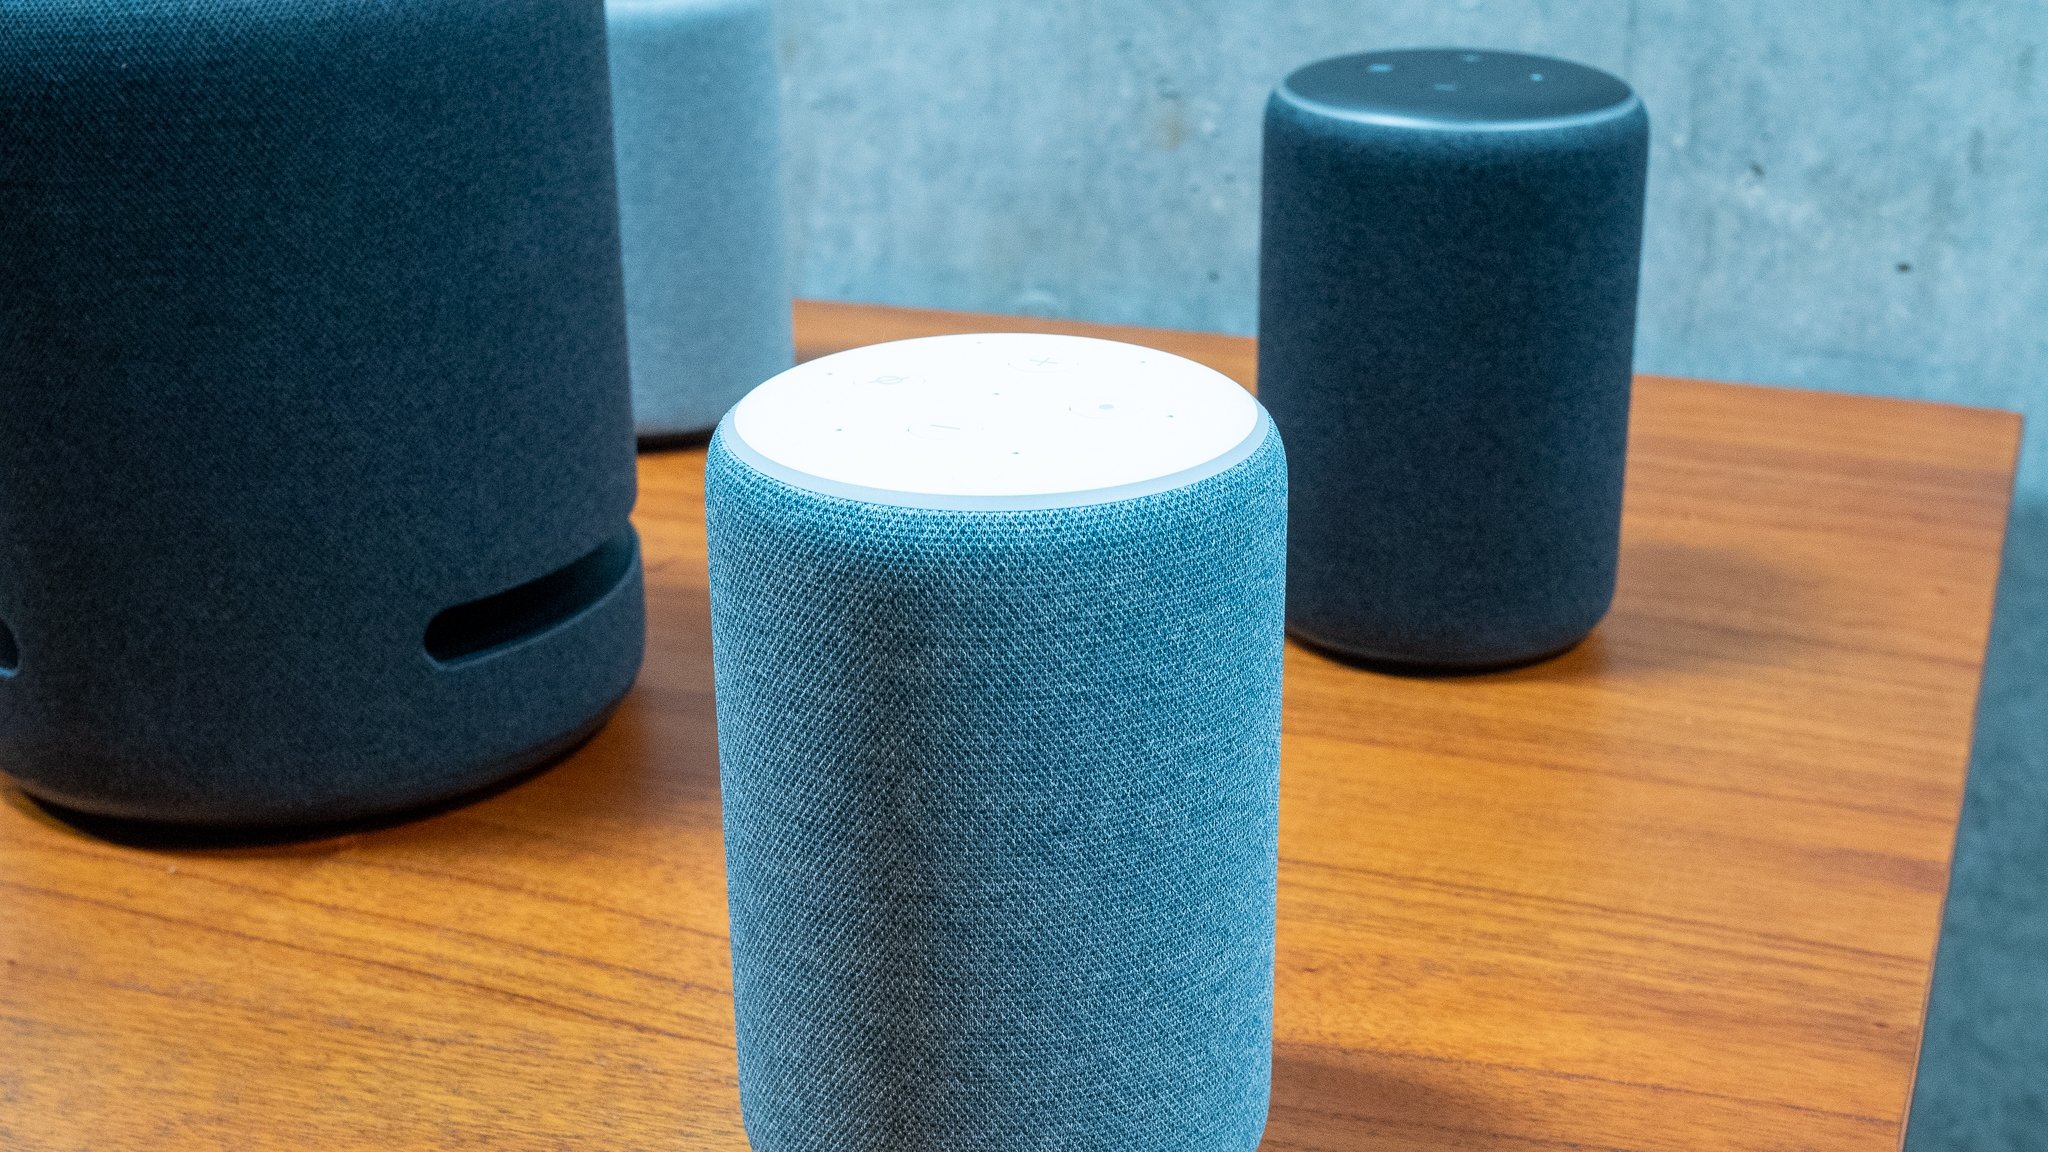 How to pair two Amazon Echo speakers to make a stereo pair |